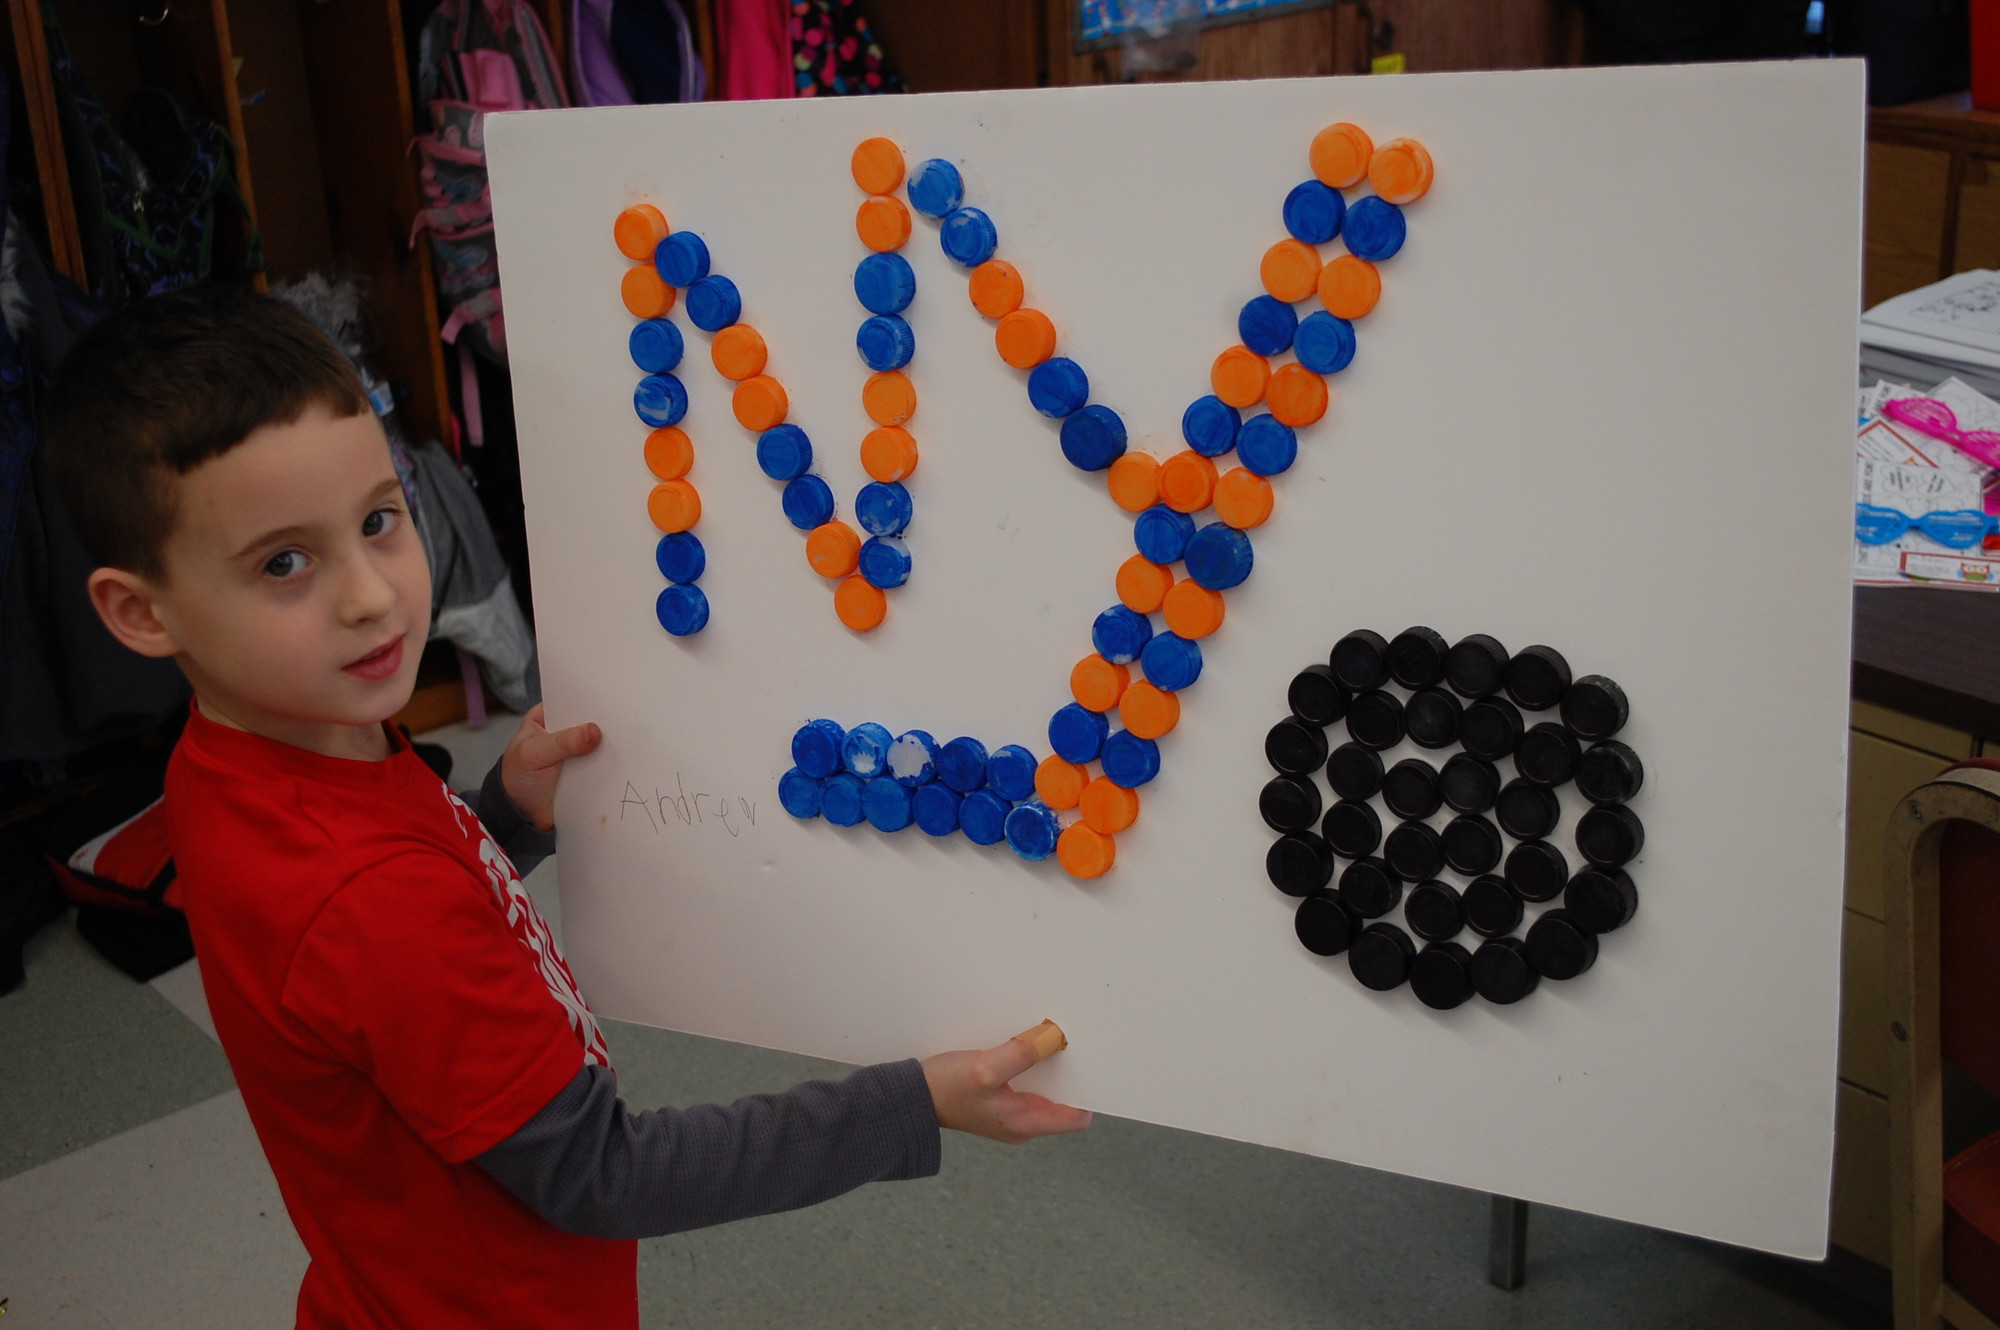 Seaford Manor School kindergartner Andrew Firth made the logo of his favorite hockey team, the Islanders, with 100 bottle caps that he painted.